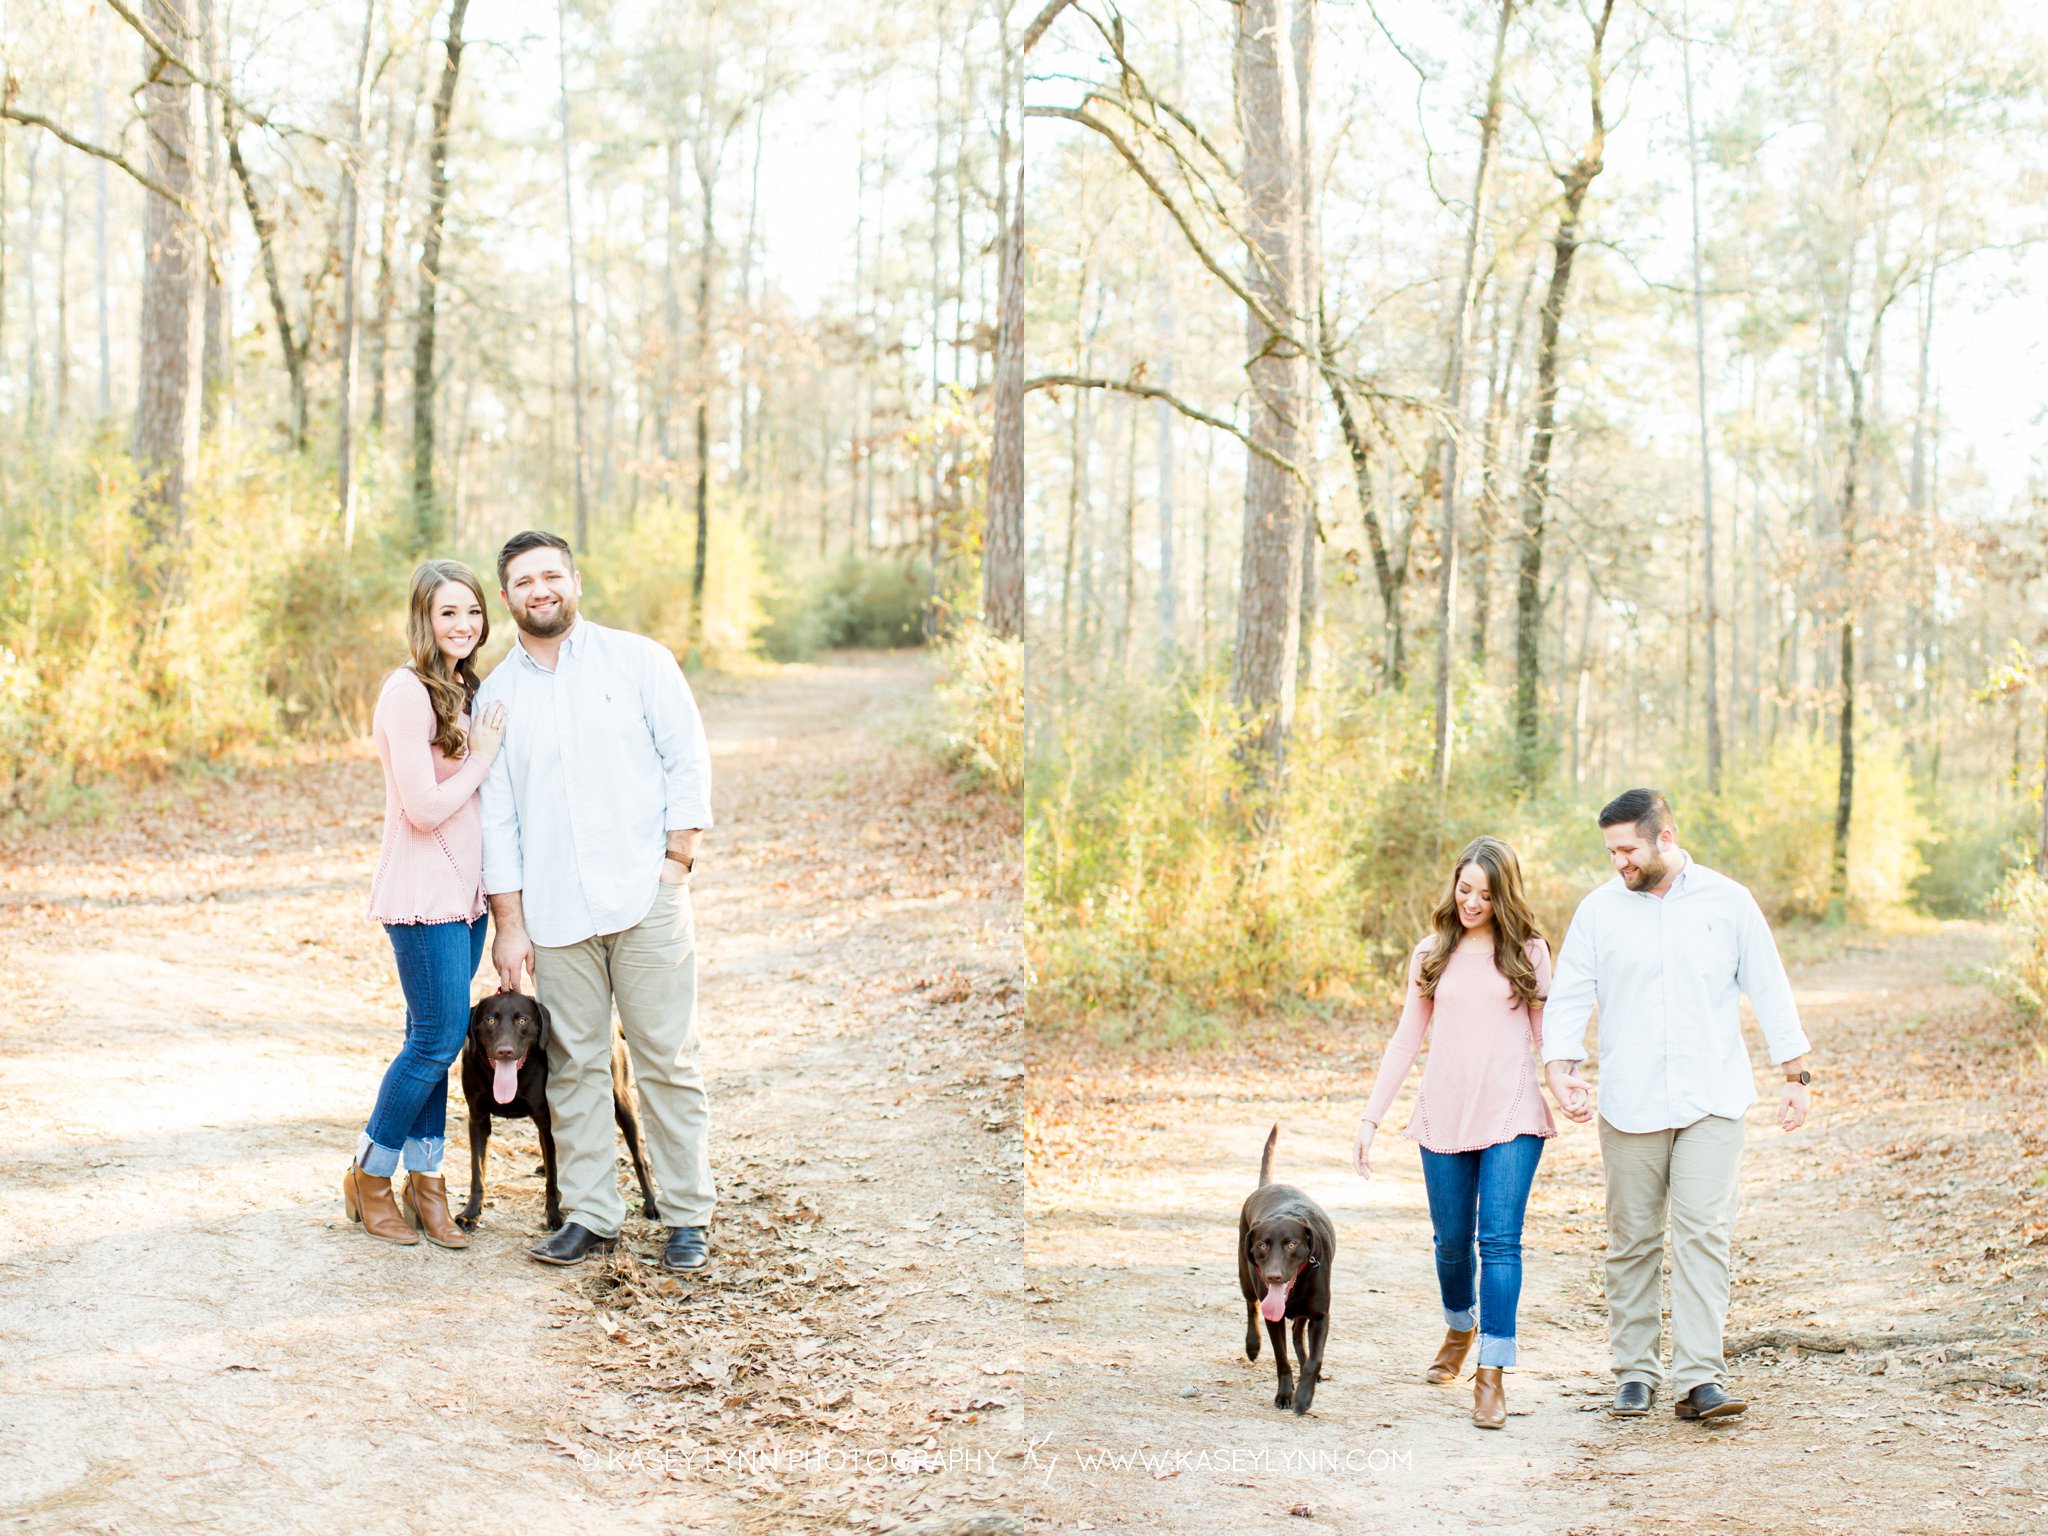 Engagement session with dogs / Kasey Lynn Photography